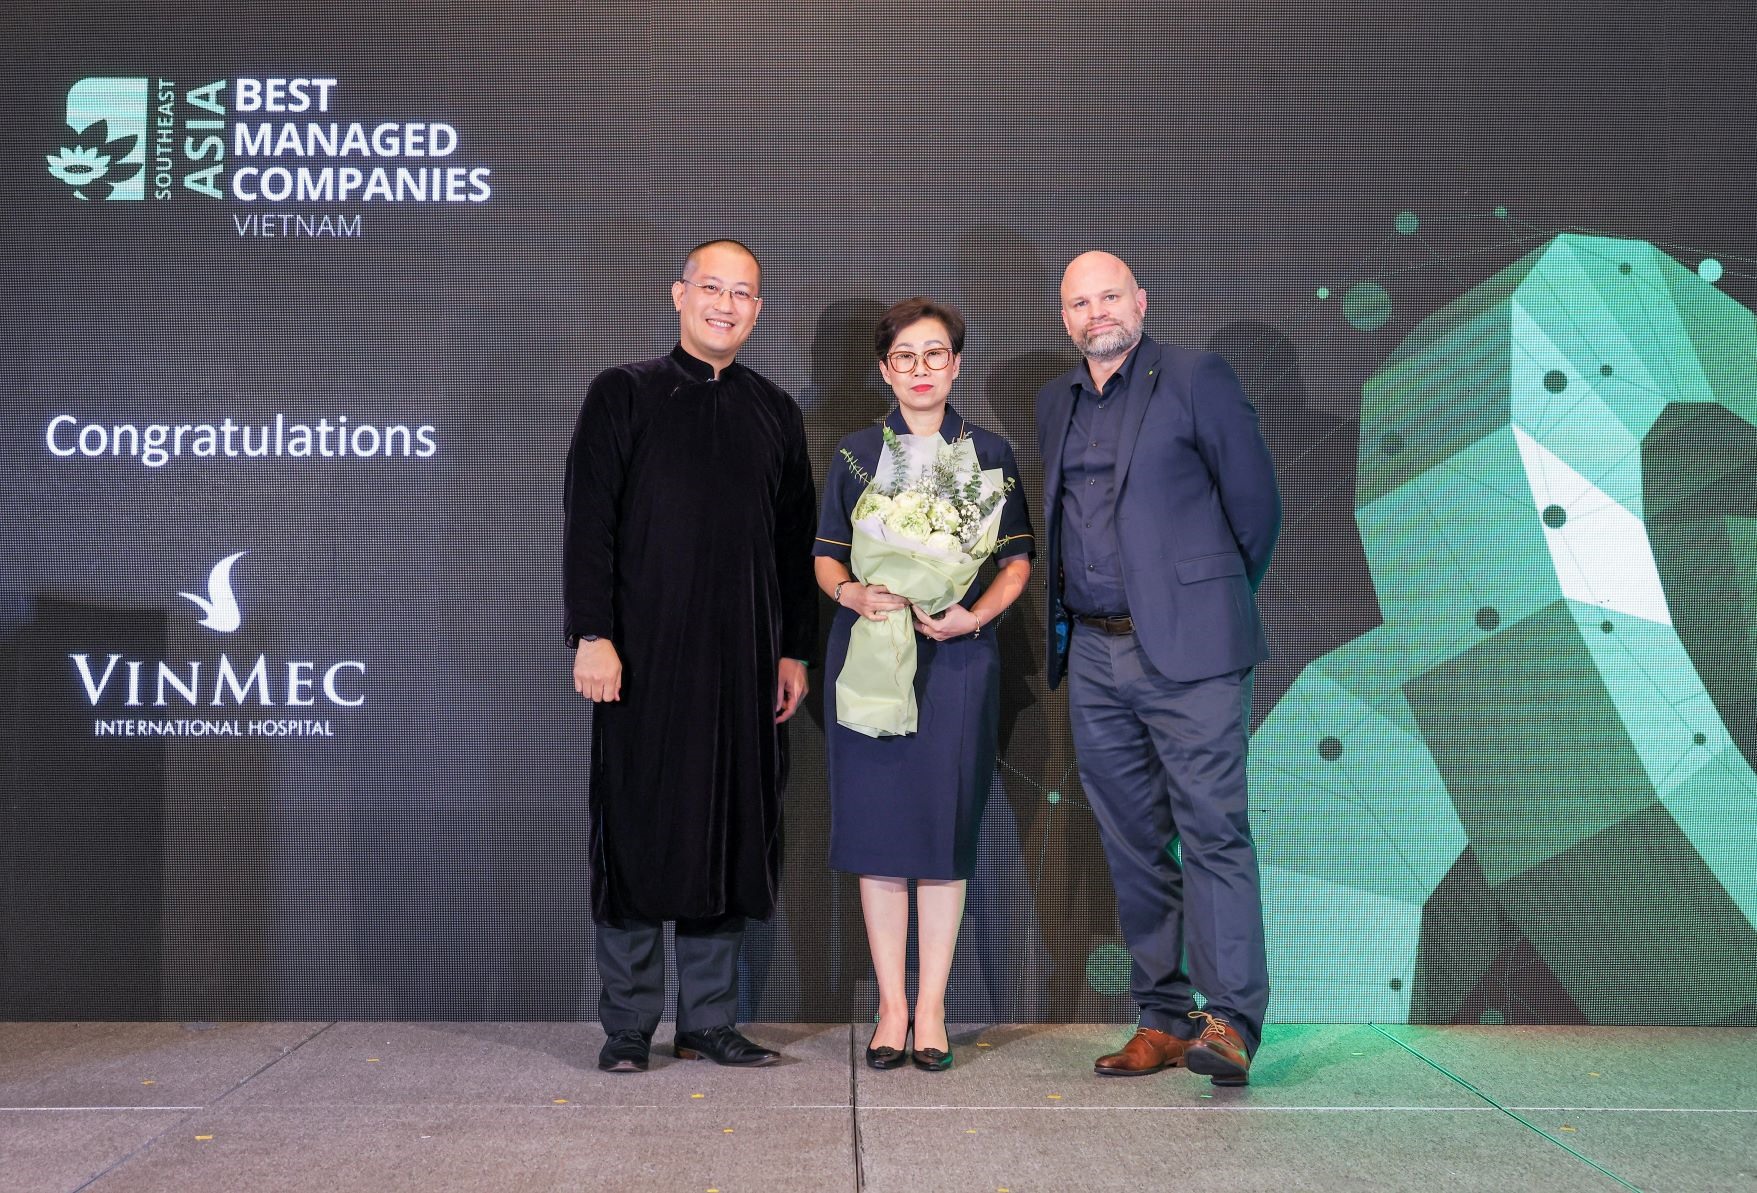 Vinmec Healthcare System named “Best Managed Company in Vietnam” for 2022 – the first time a medical institution received this prestigious award in Vietnam